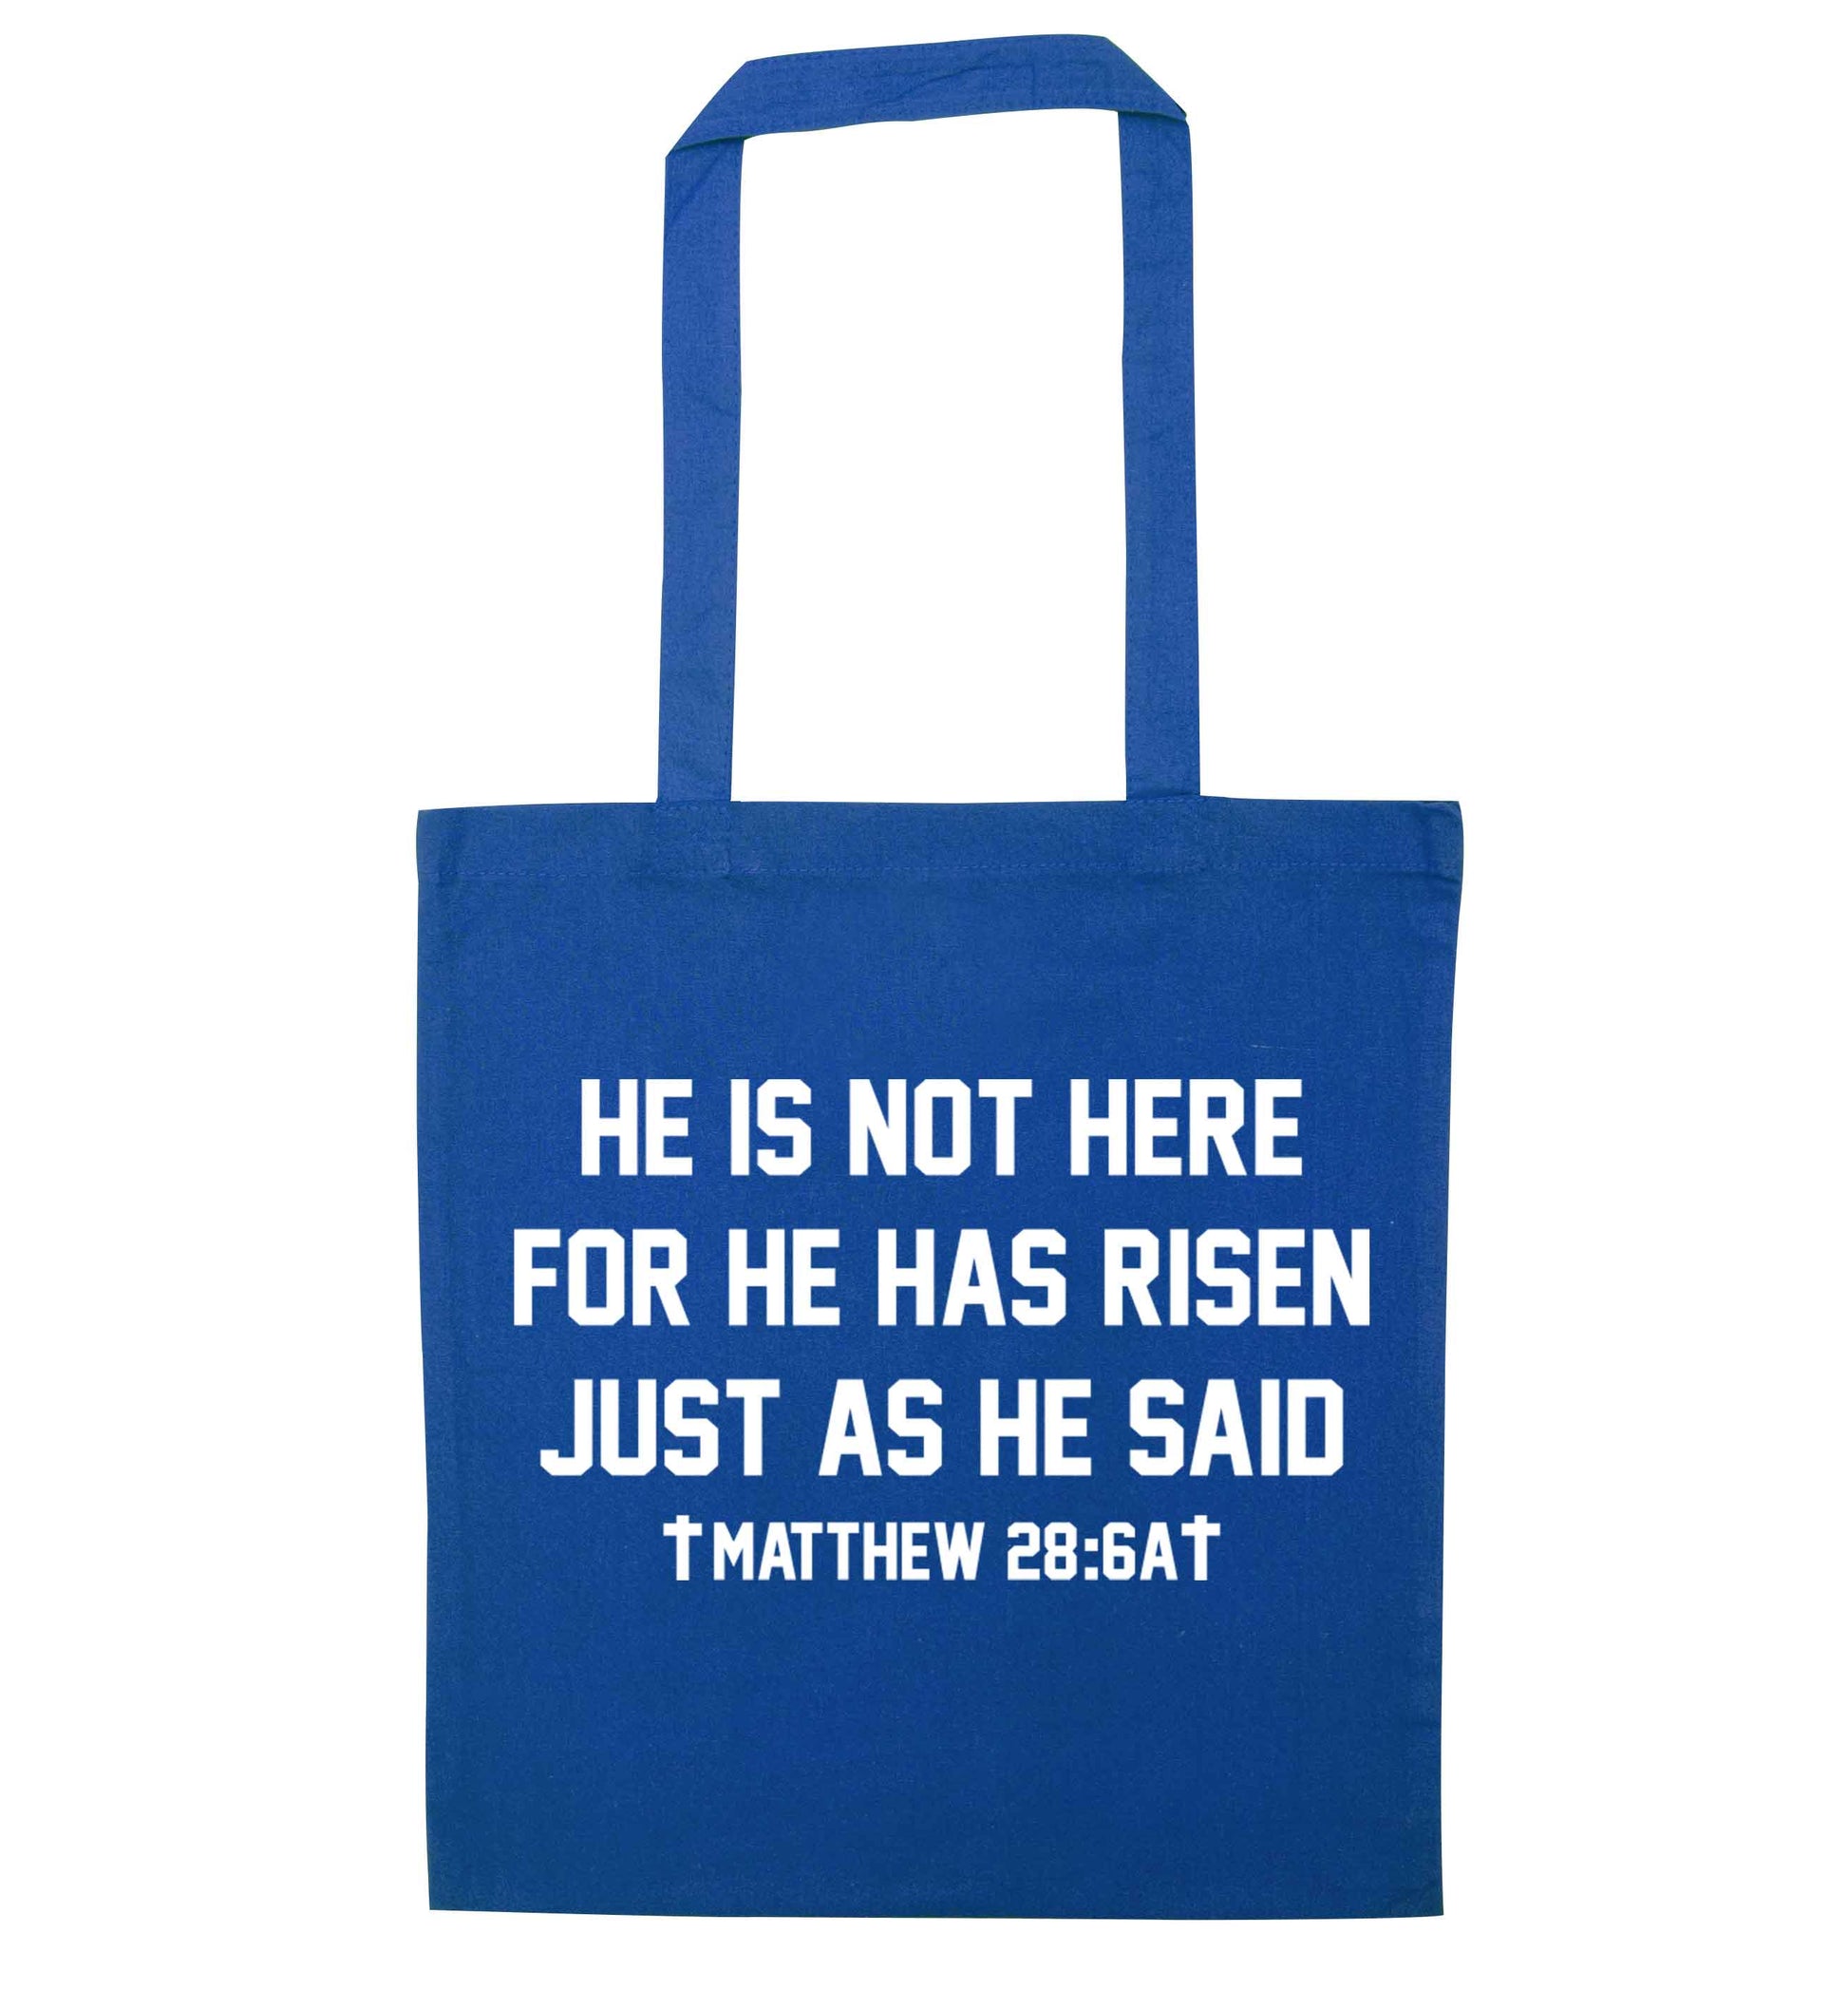 He is not here for he has risen just as he said matthew 28:6A blue tote bag